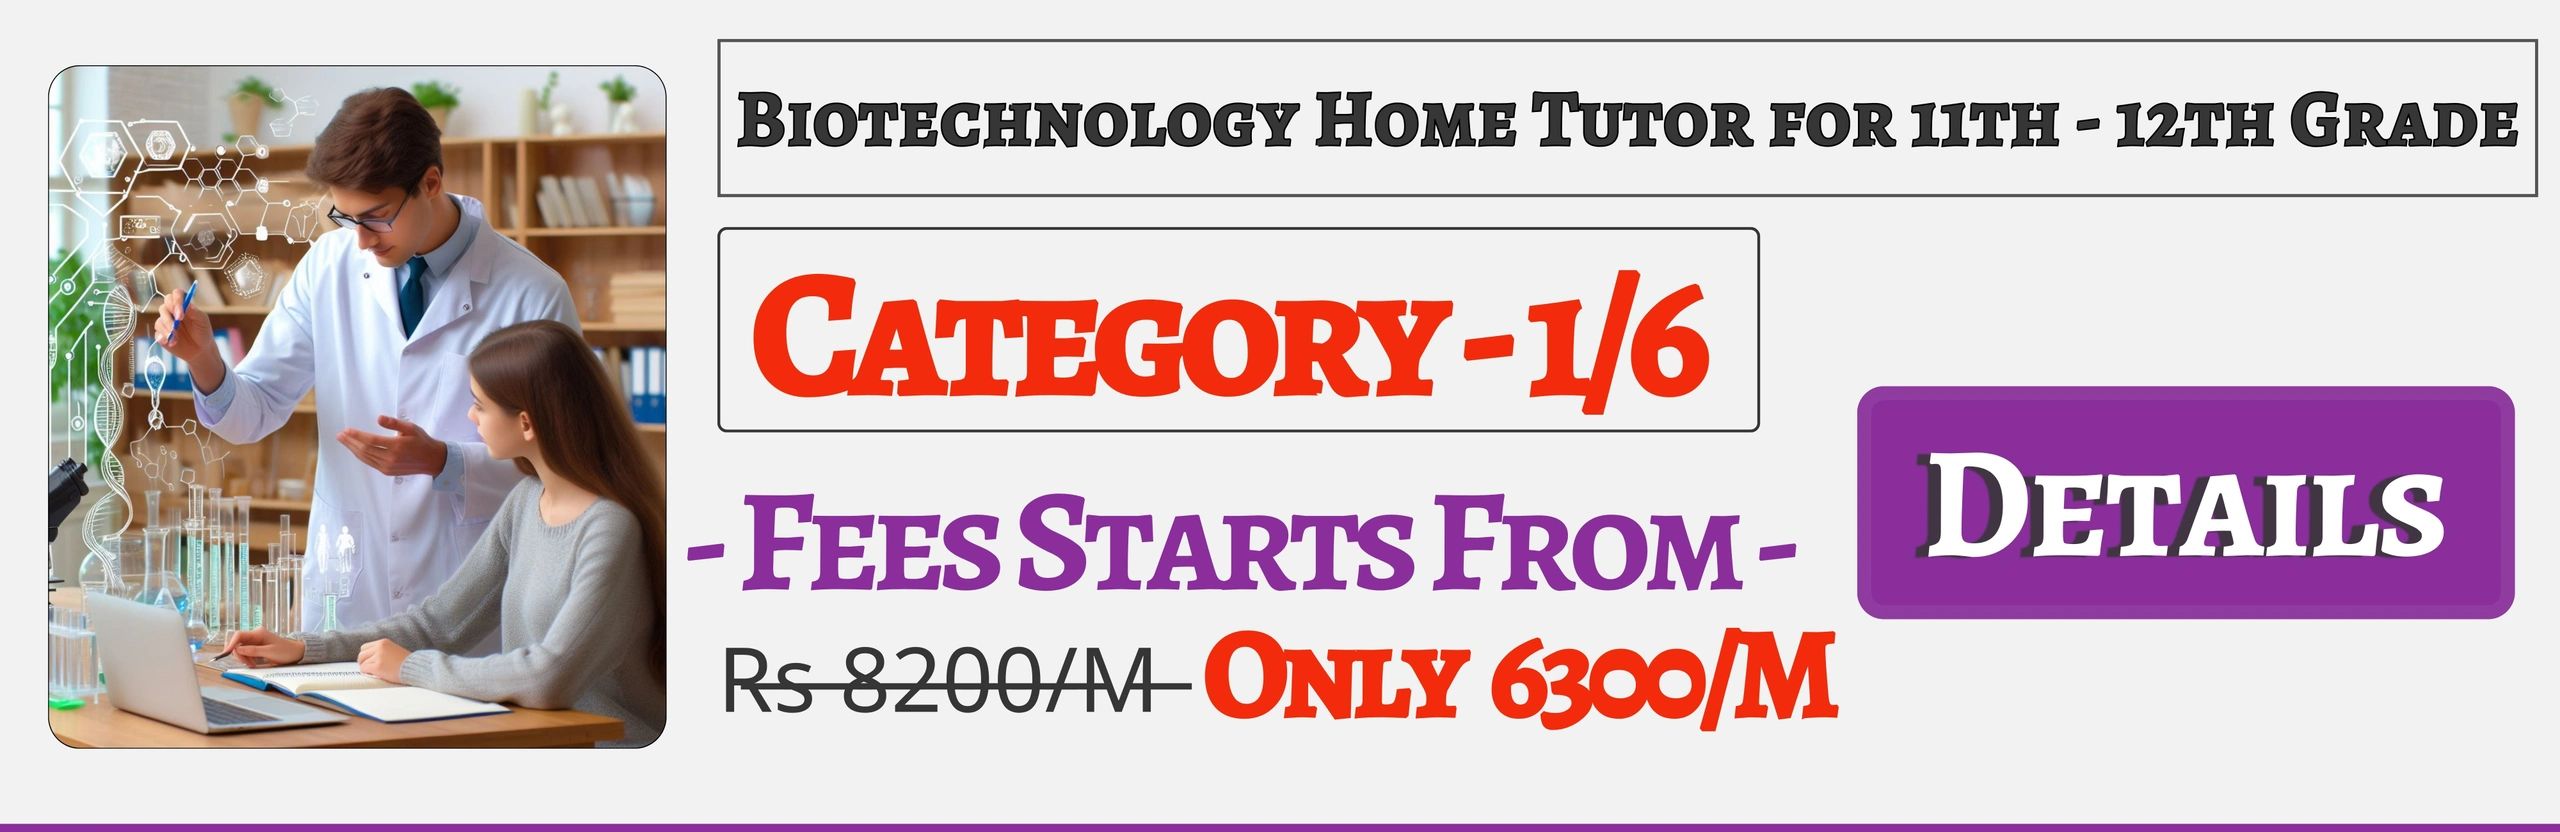 Book Best Nearby Biotechnology Home Tuition Tutors For 11th & 12th In Jaipur , Fees Only 6300/M